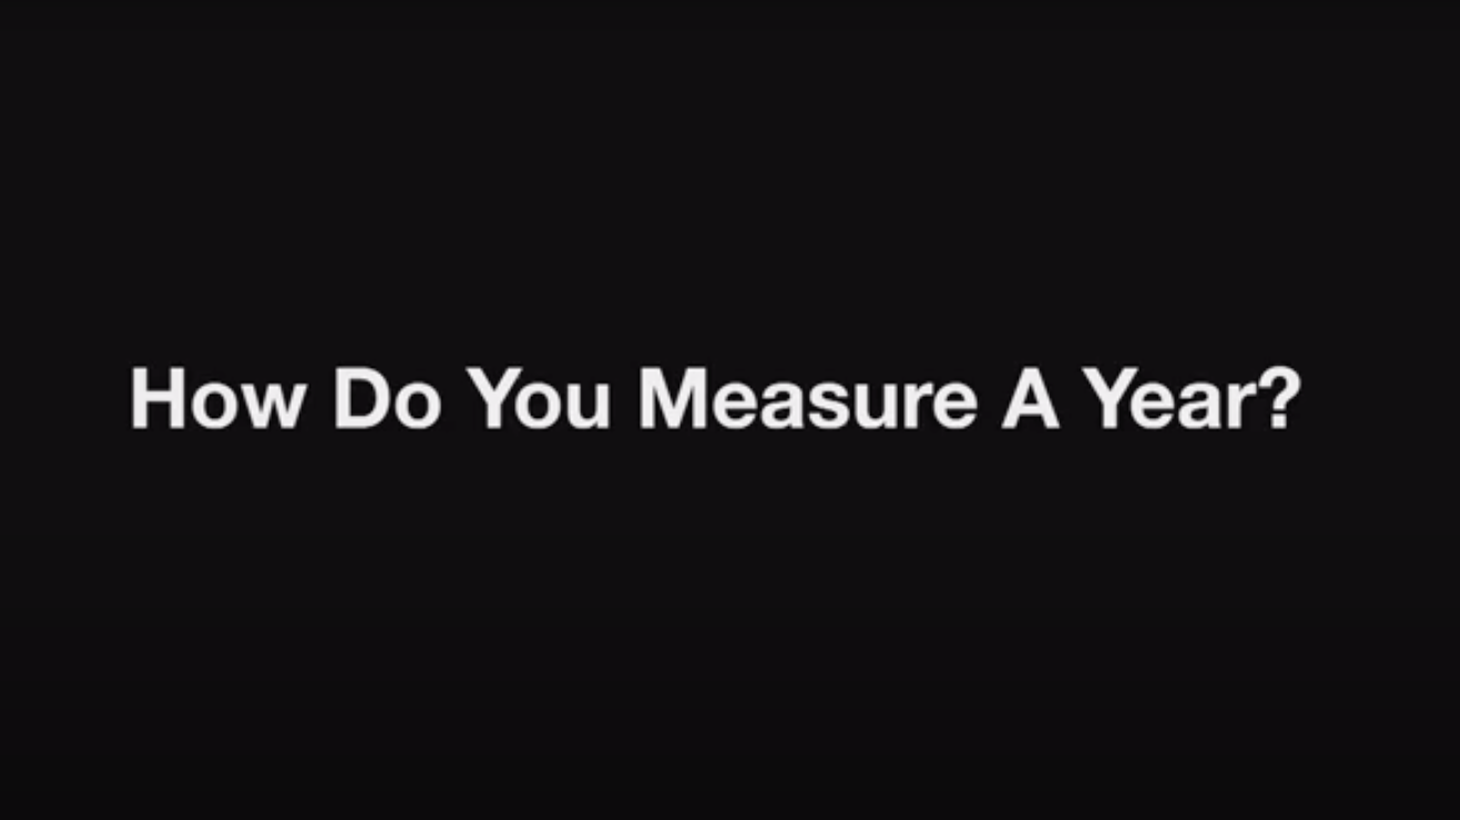 For 17 years, Jay Rosenblatt filmed his daughter on her birthday and asked her a series of questions, turning that footage into a short film called “How Do You Measure A Year?”